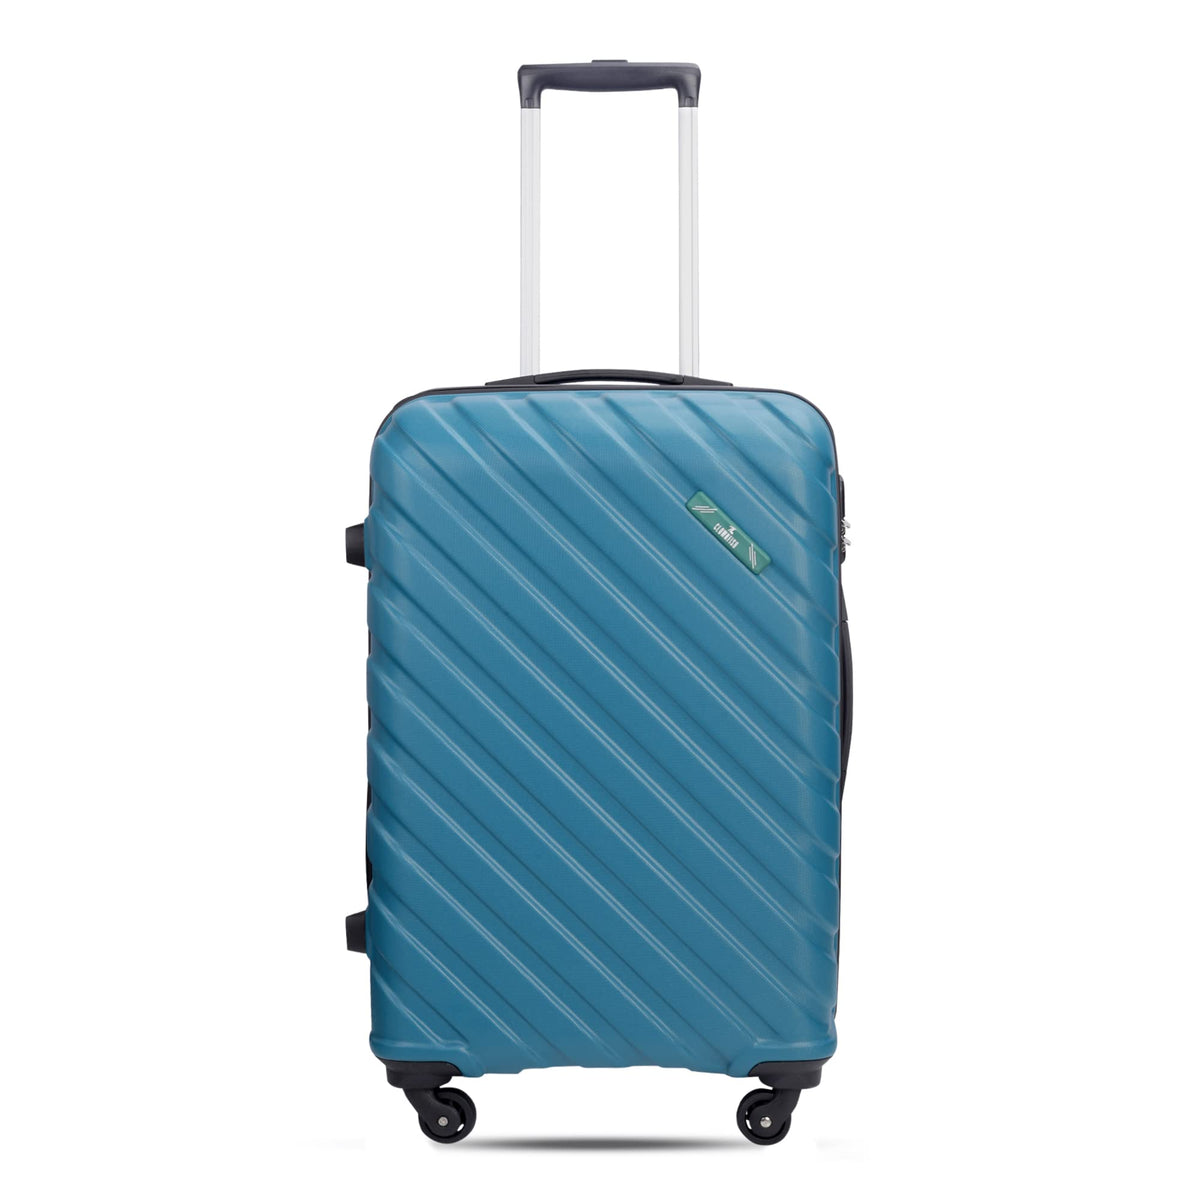 THE CLOWNFISH Armstrong Luggage ABS Hard Case Suitcase Four Wheel Trolley Bag- Teal (Medium Size, 65 cm- 24 inch)